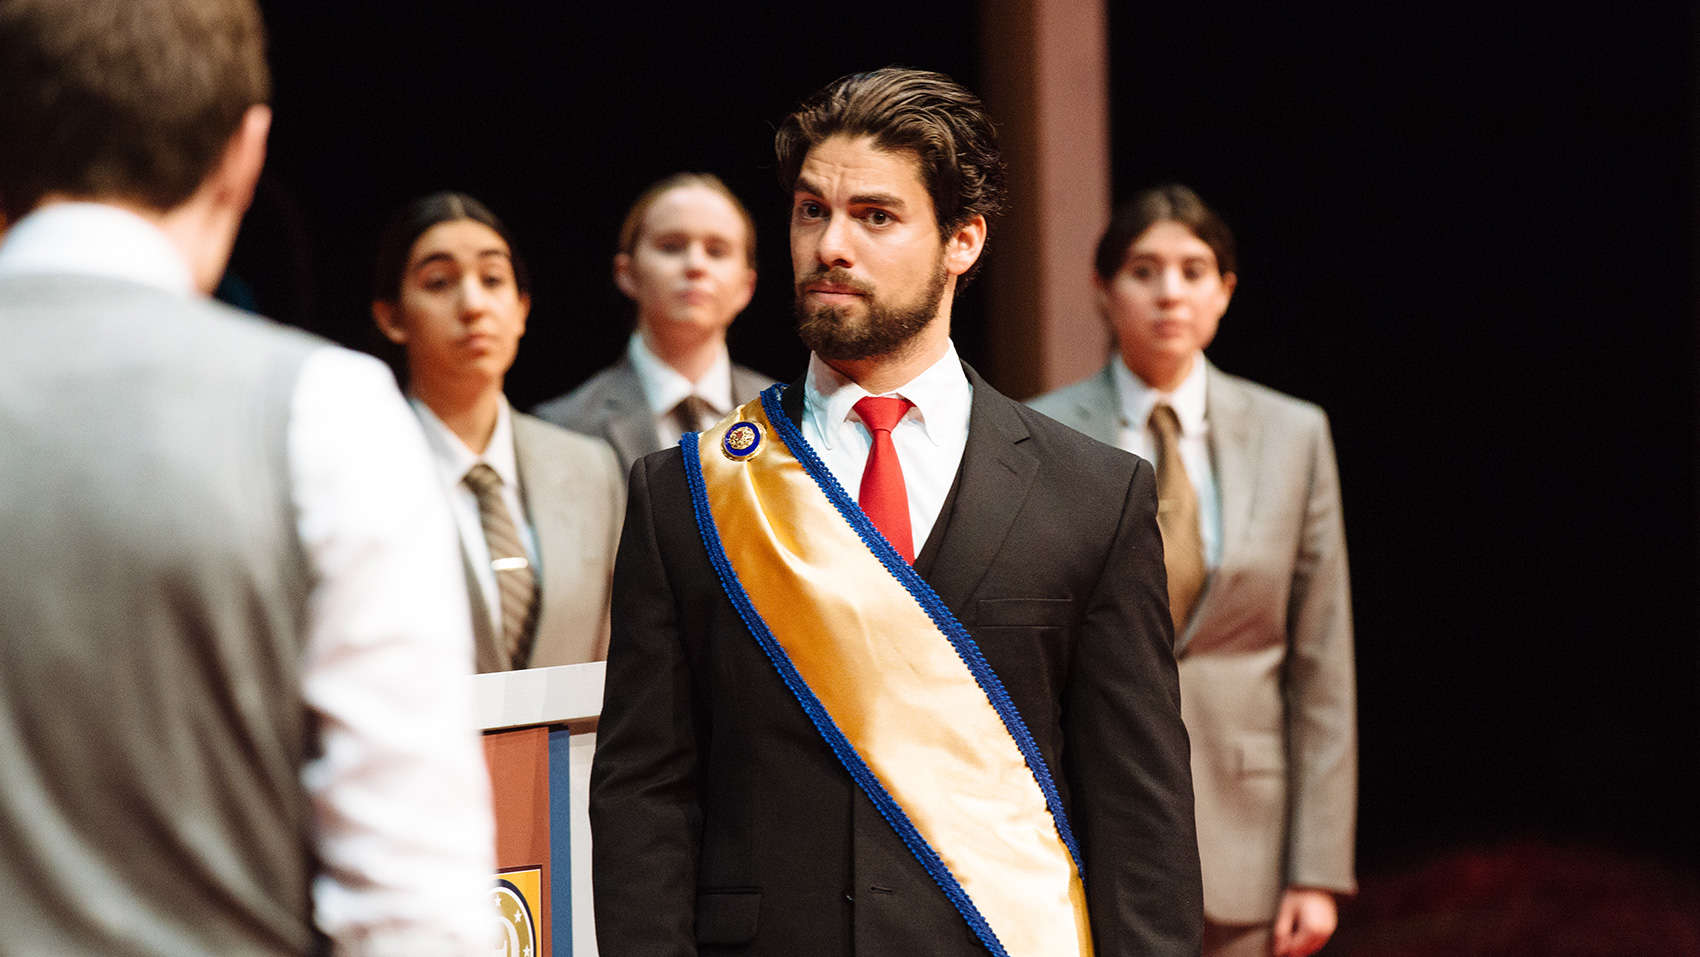 A man wearing a red tie and a yellow-gold sash with blue trim stands facing another man, whose back is facing us. The man in the rd tie has a quizzical eyebrow raised. Three women wearing suits and ties stand behind them, watching.